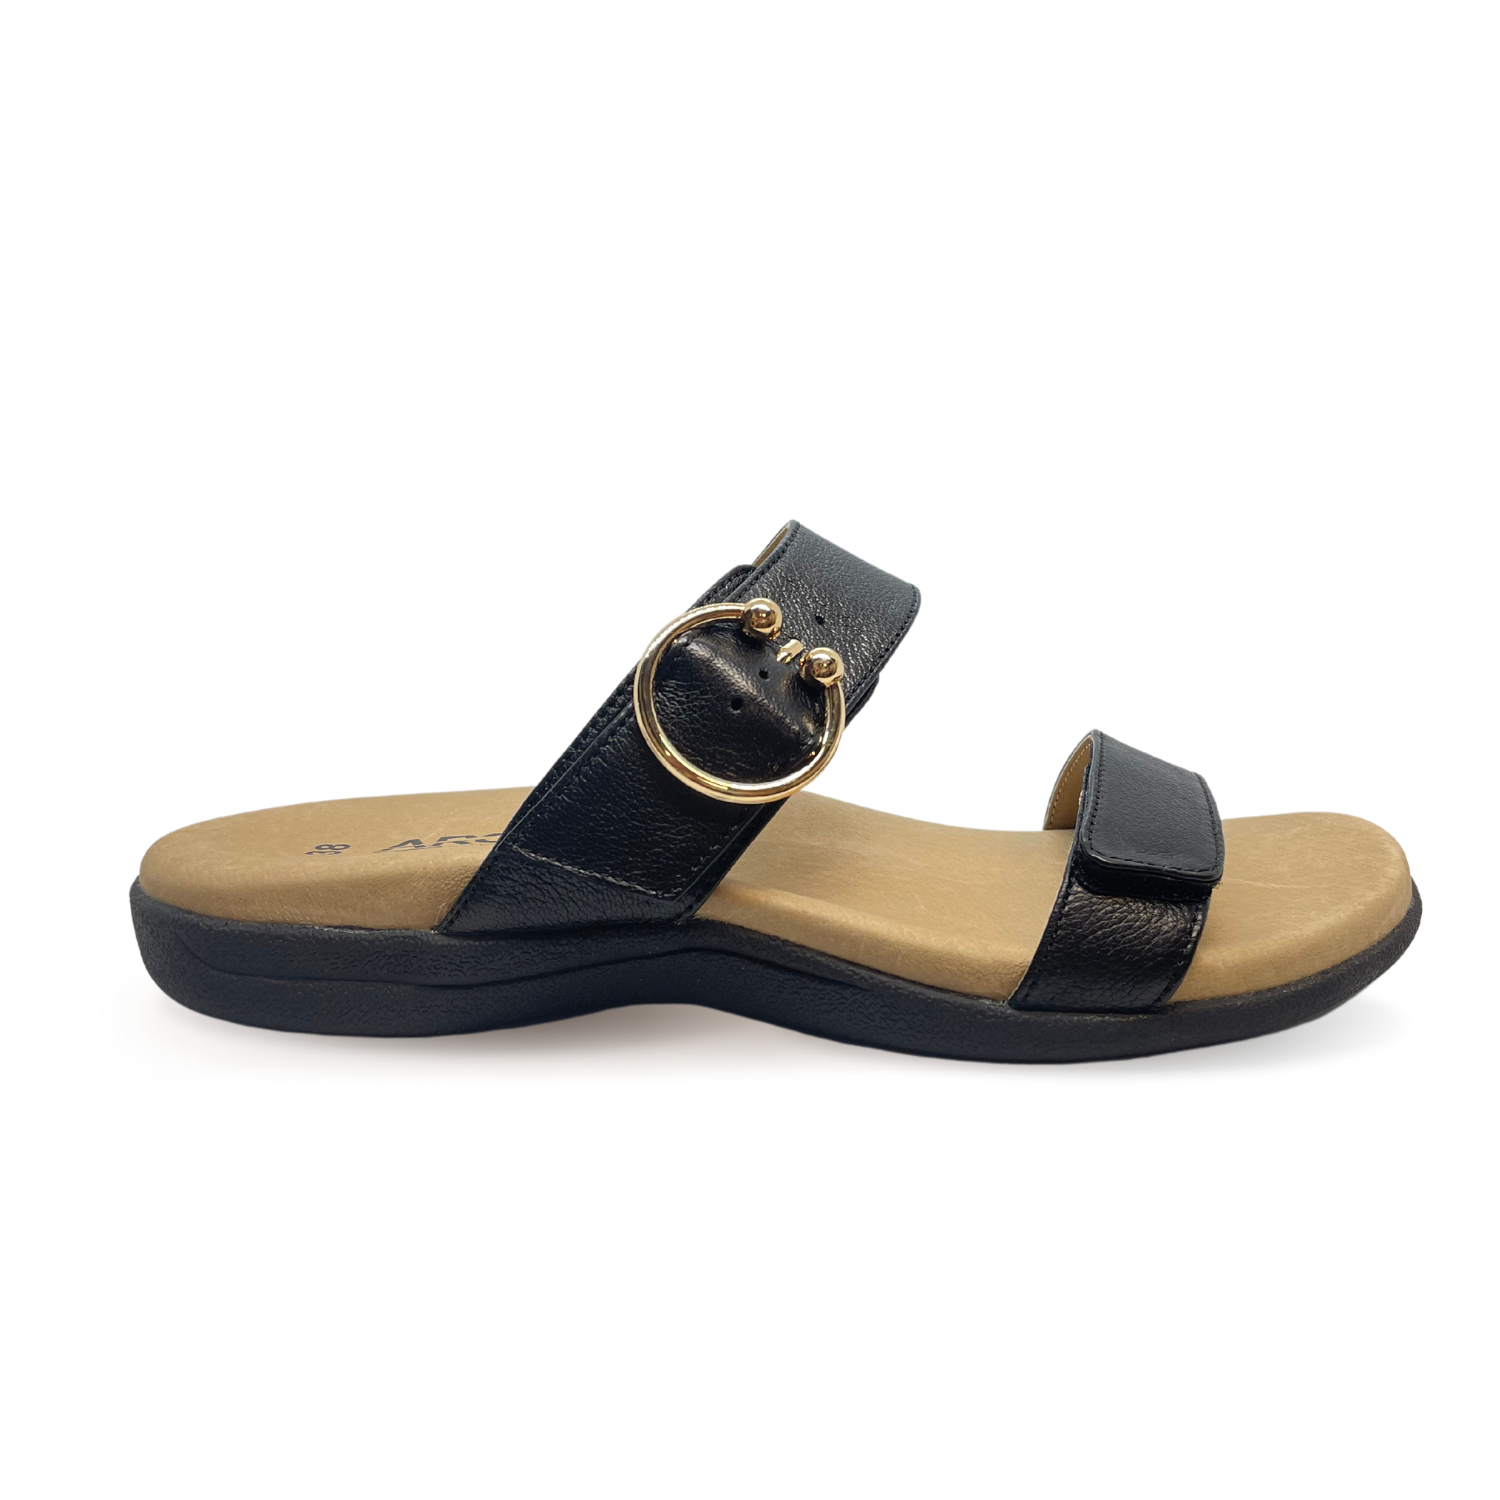 Taya Sandals by SPURR Online | THE ICONIC | Australia